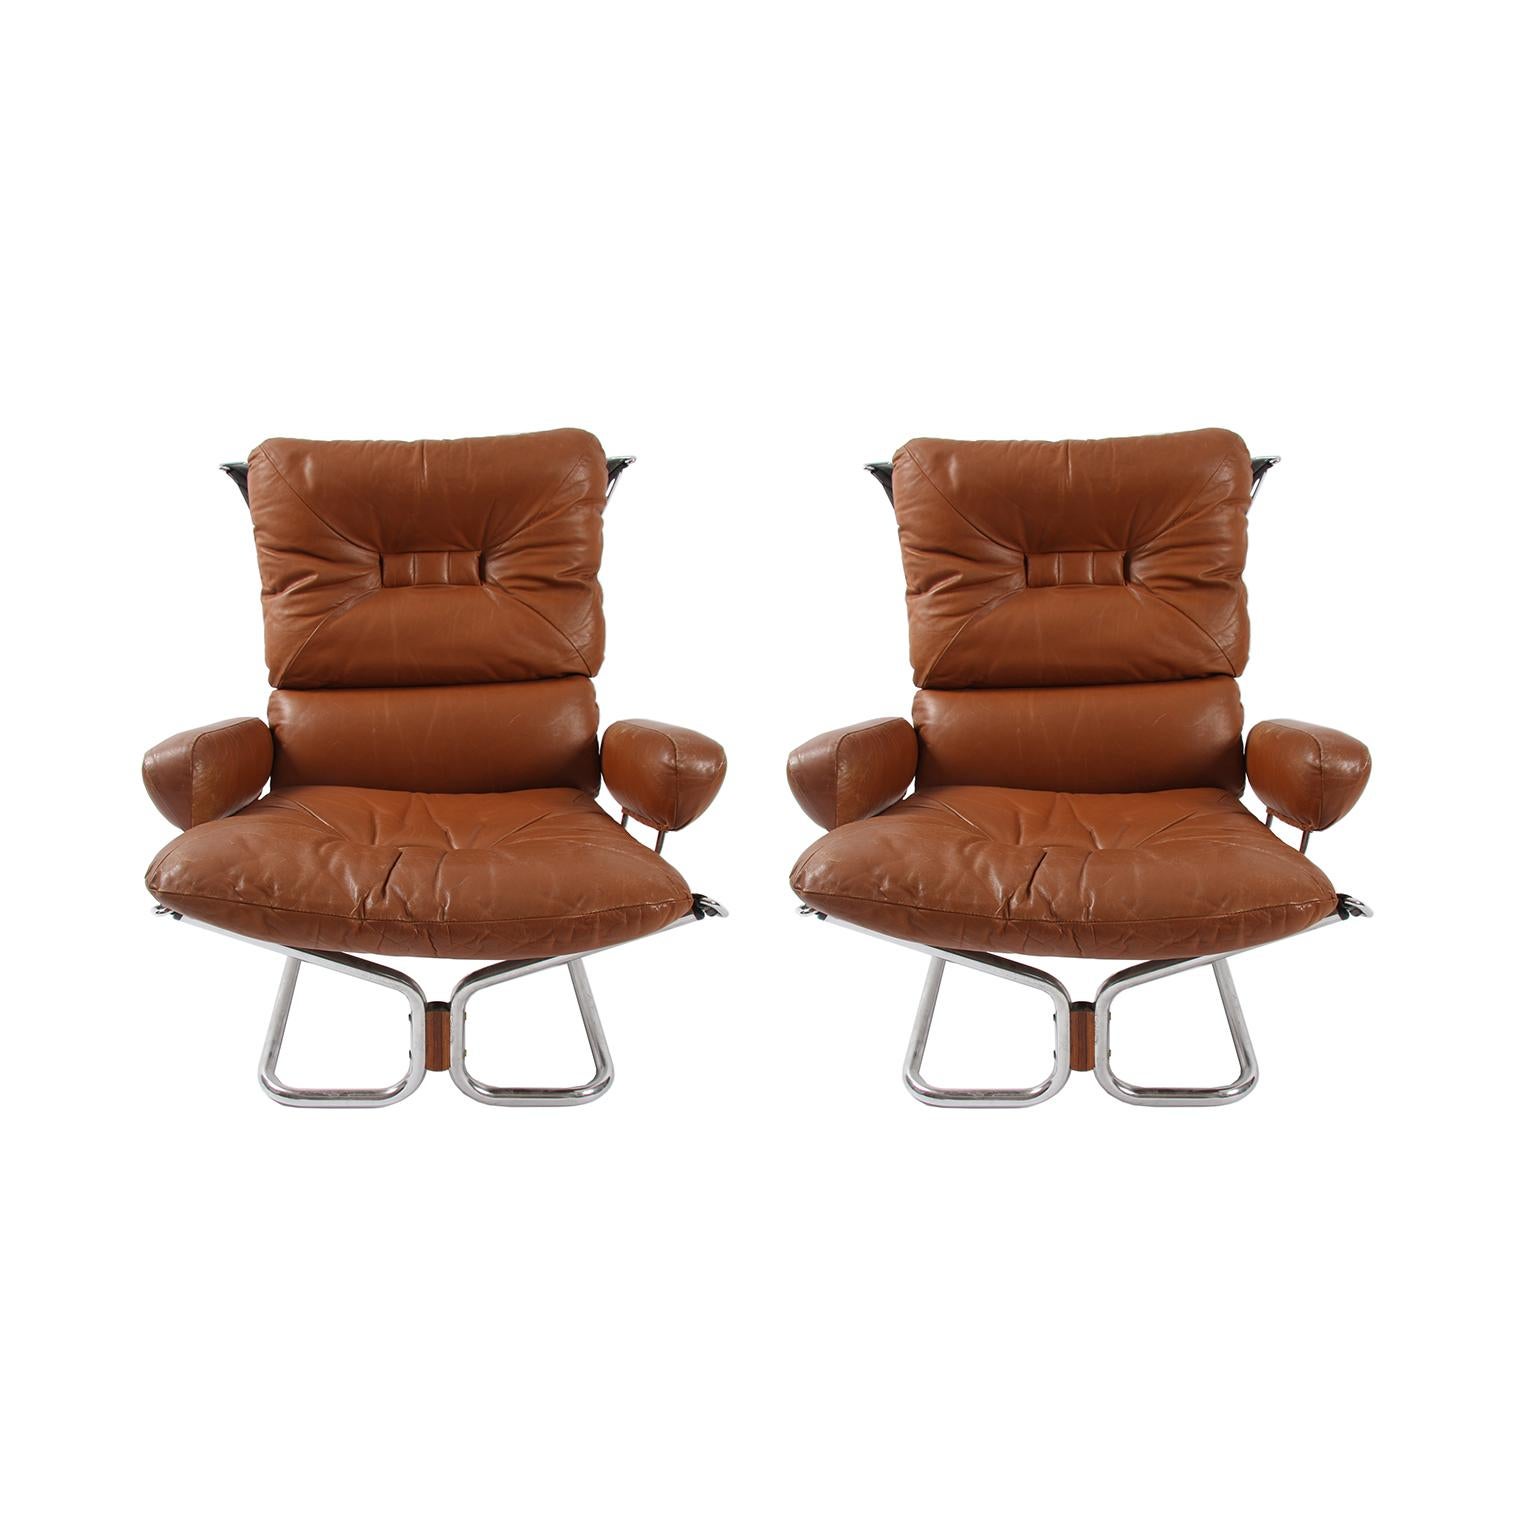 Late 20th Century Pair of Relling Chairs For Sale